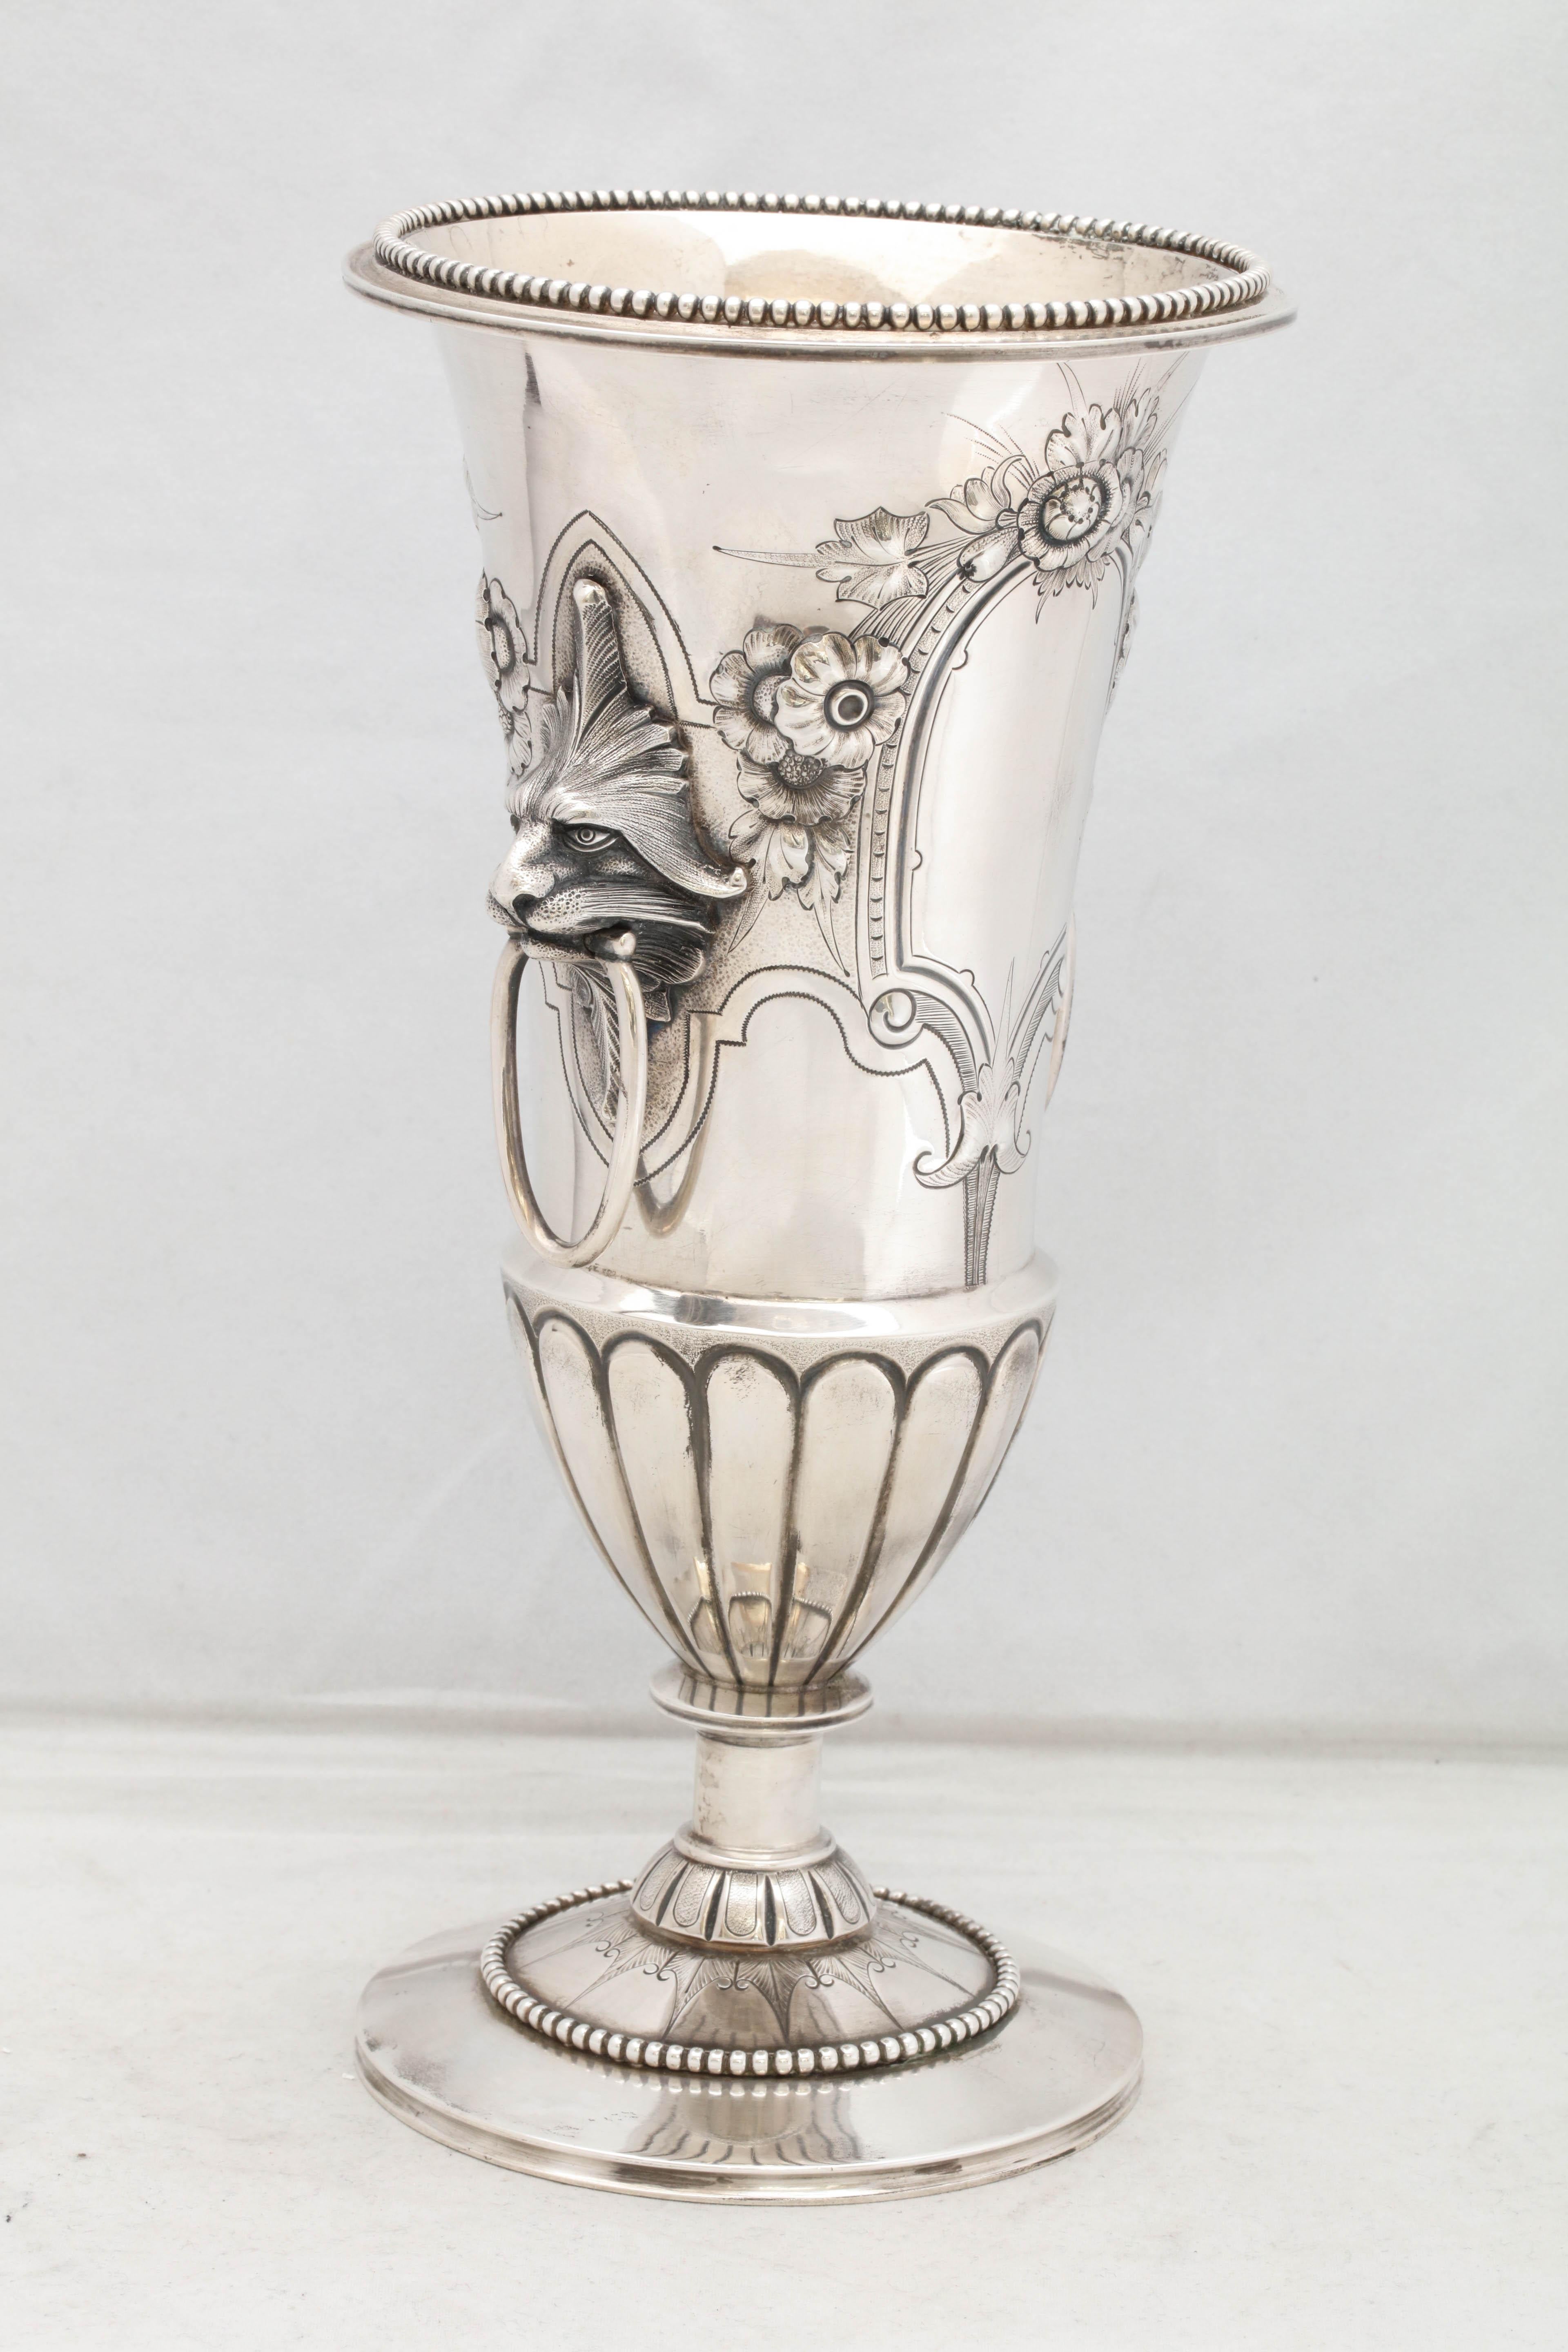 American Neoclassical Coin Silver Pedestal Based Vase by Wood & Hughes